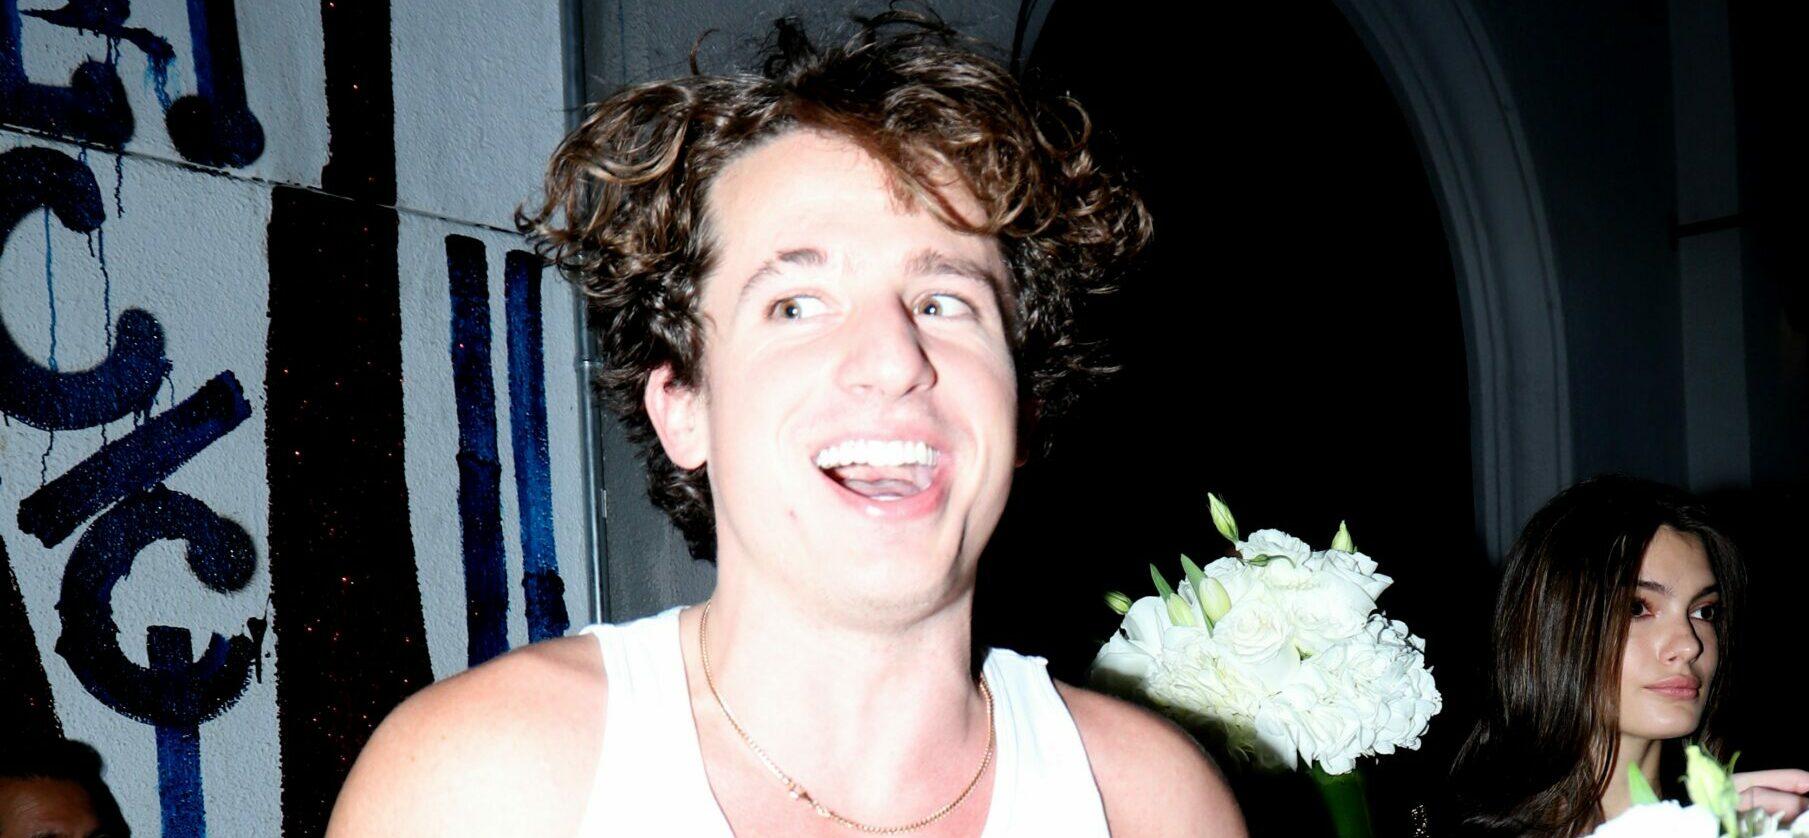 Charlie Puth helps friend carry out flower bouquets from dinner party at Craig apos s